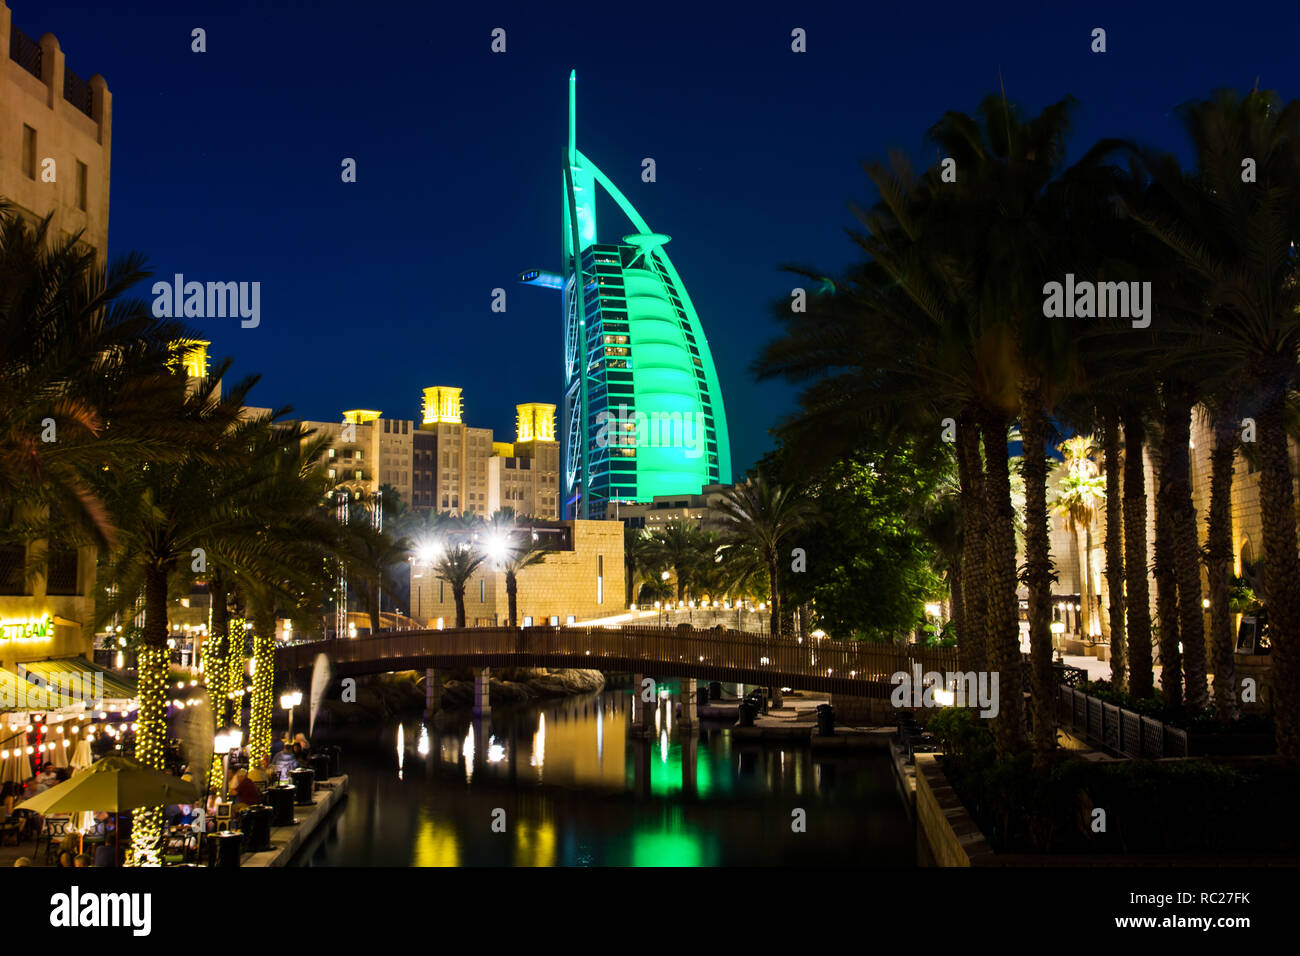 Dubai, United Arab Emirates - April 20, 2018: Burj Al Arab luxury hotel reflected in water at night, view from the Madinat Jumeirah luxury resort in D Stock Photo